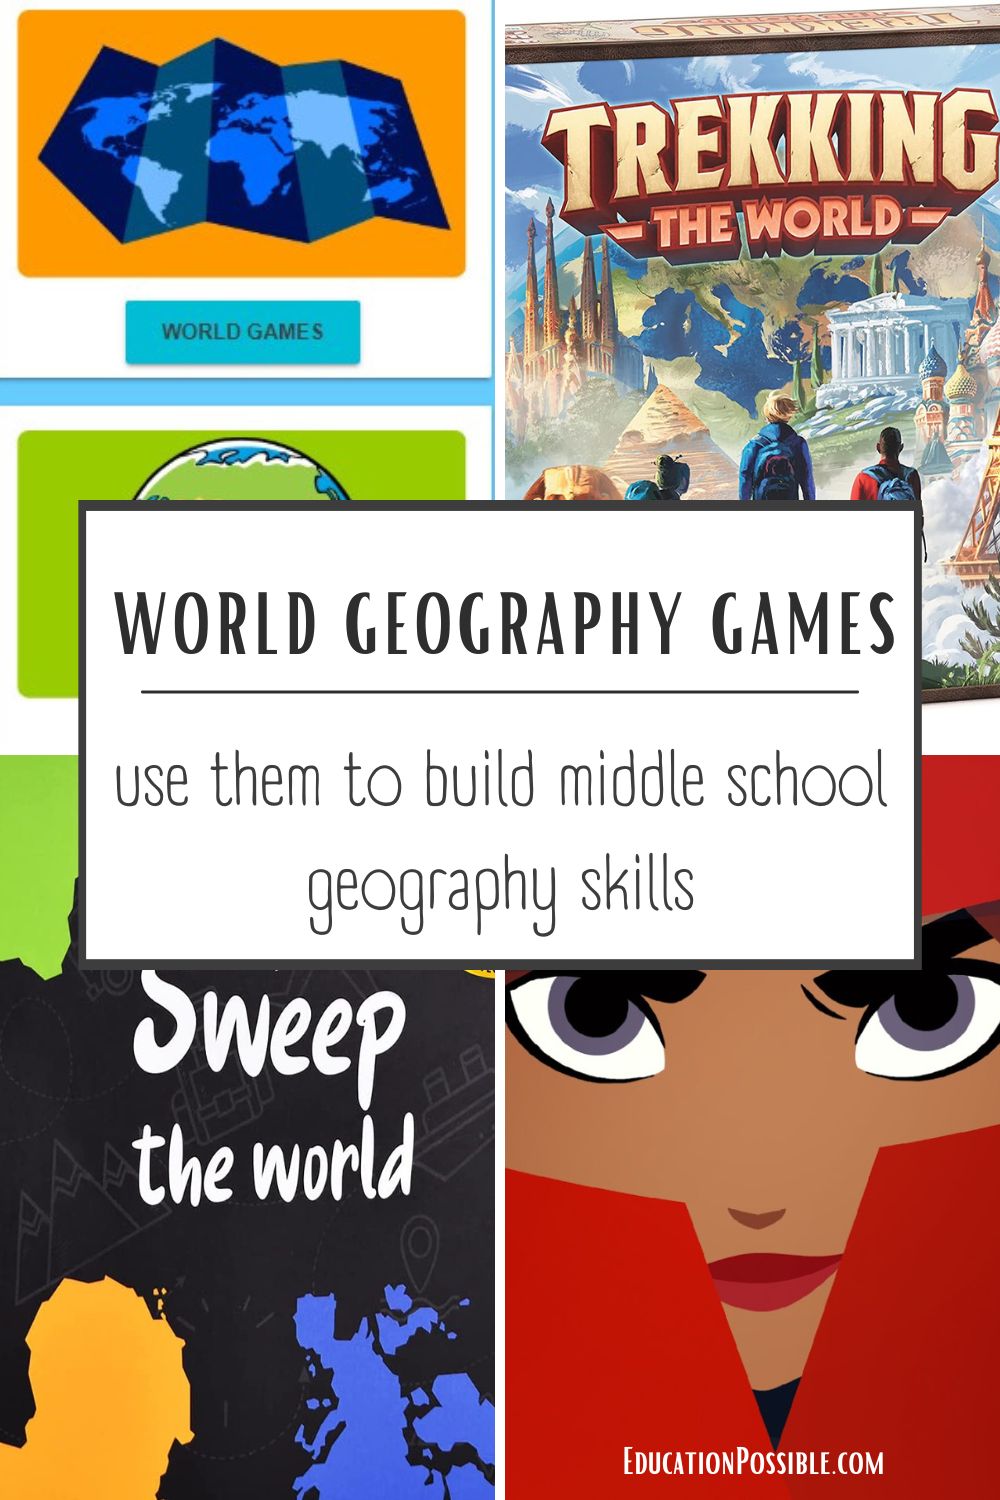 Images of 4 different world geography games.